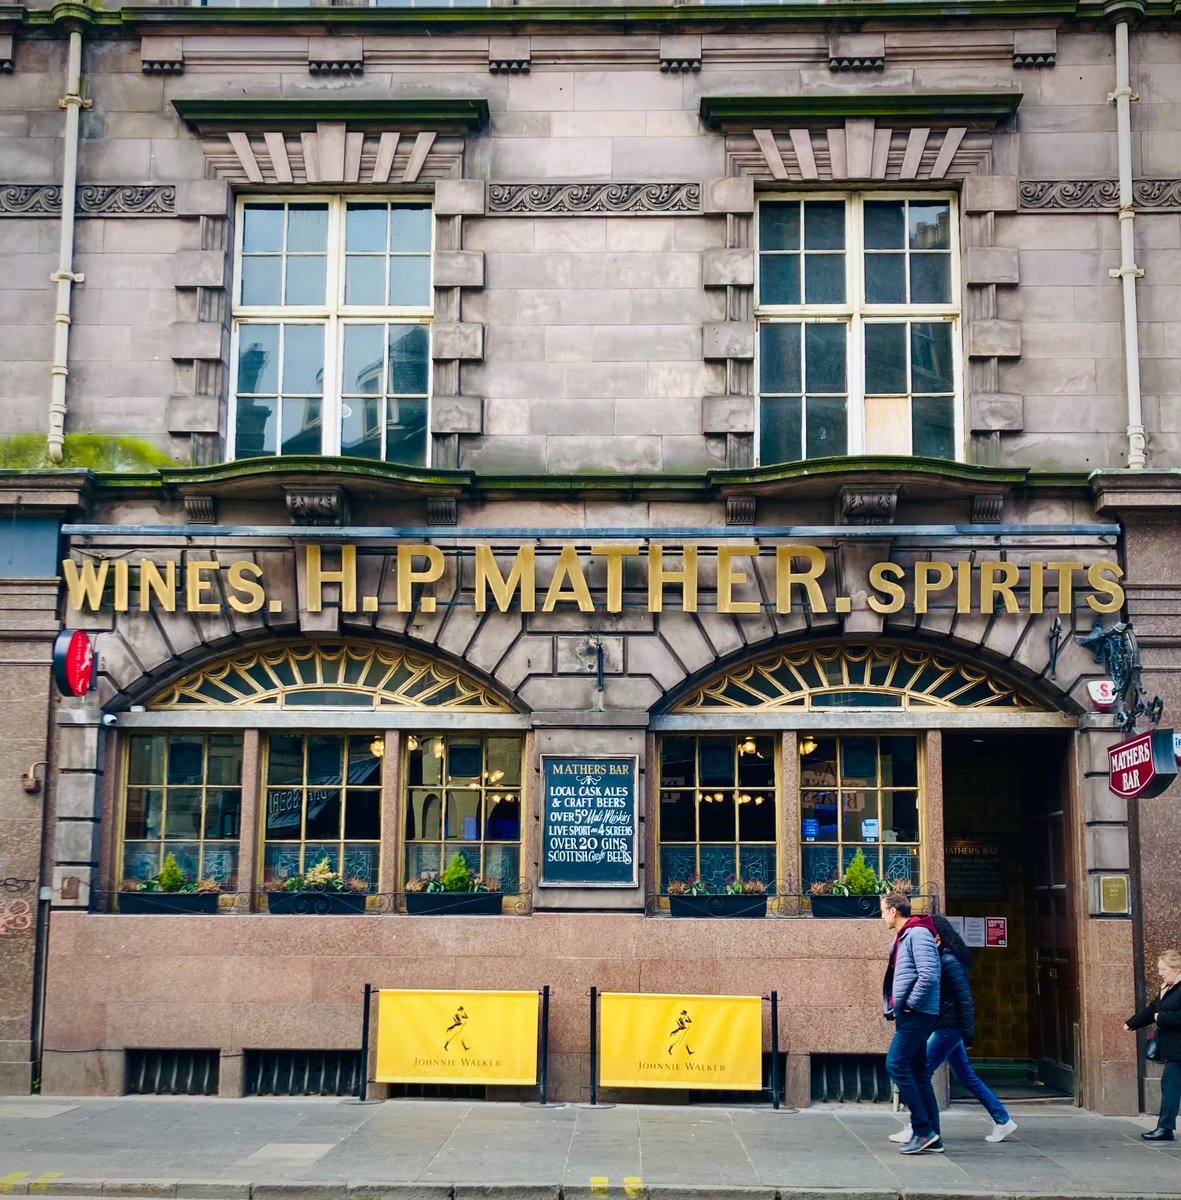 Pubs of Edinburgh’s West End. Established 1903 This is next door to what will be one of Edinburgh’s finest hotels. @MathersWestEnd